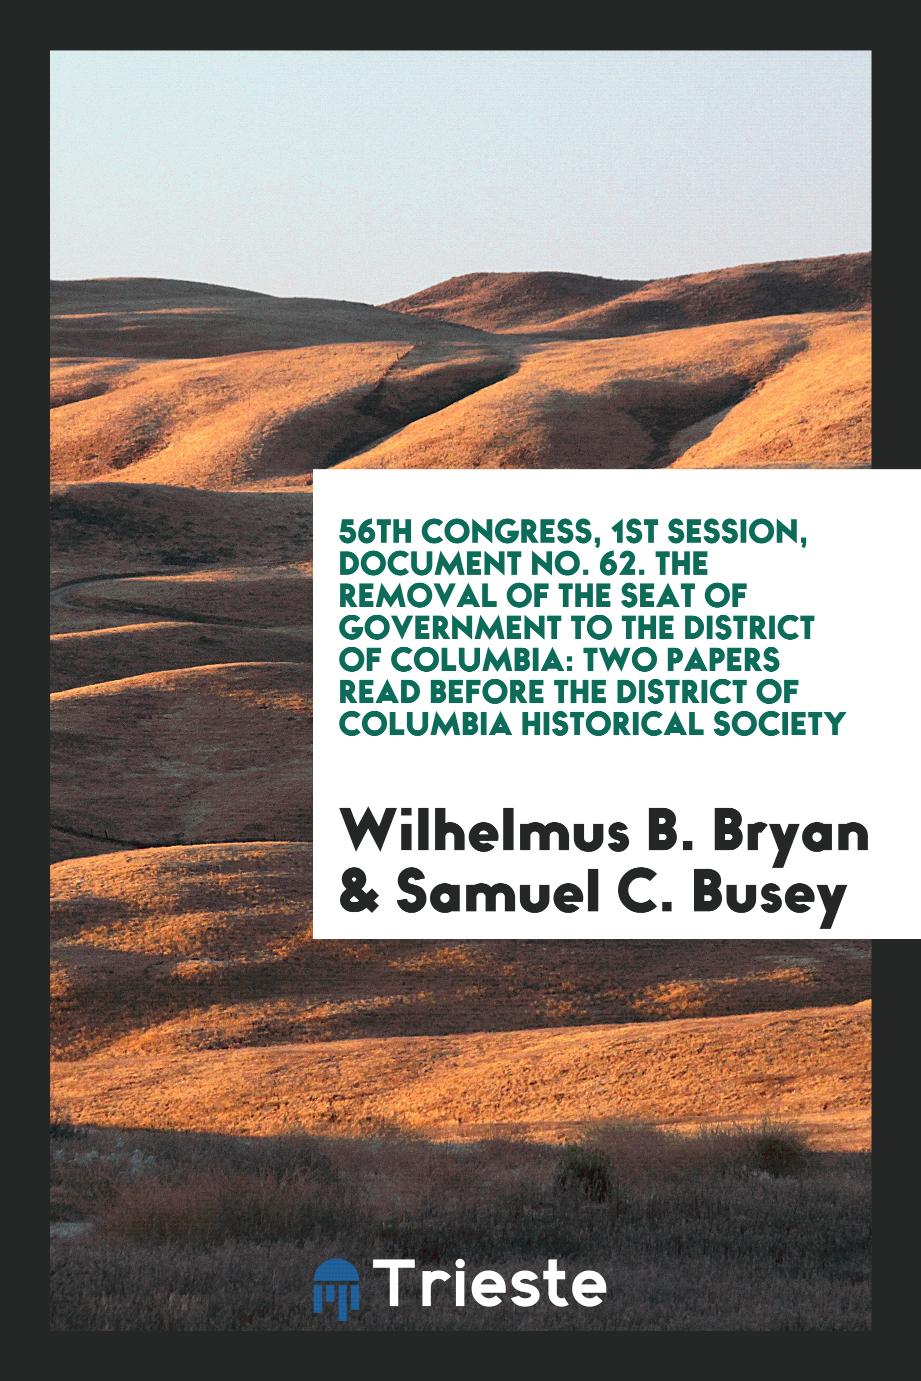 56th Congress, 1st Session, Document No. 62. The removal of the seat of government to the District of Columbia: two papers read before the District of Columbia Historical Society